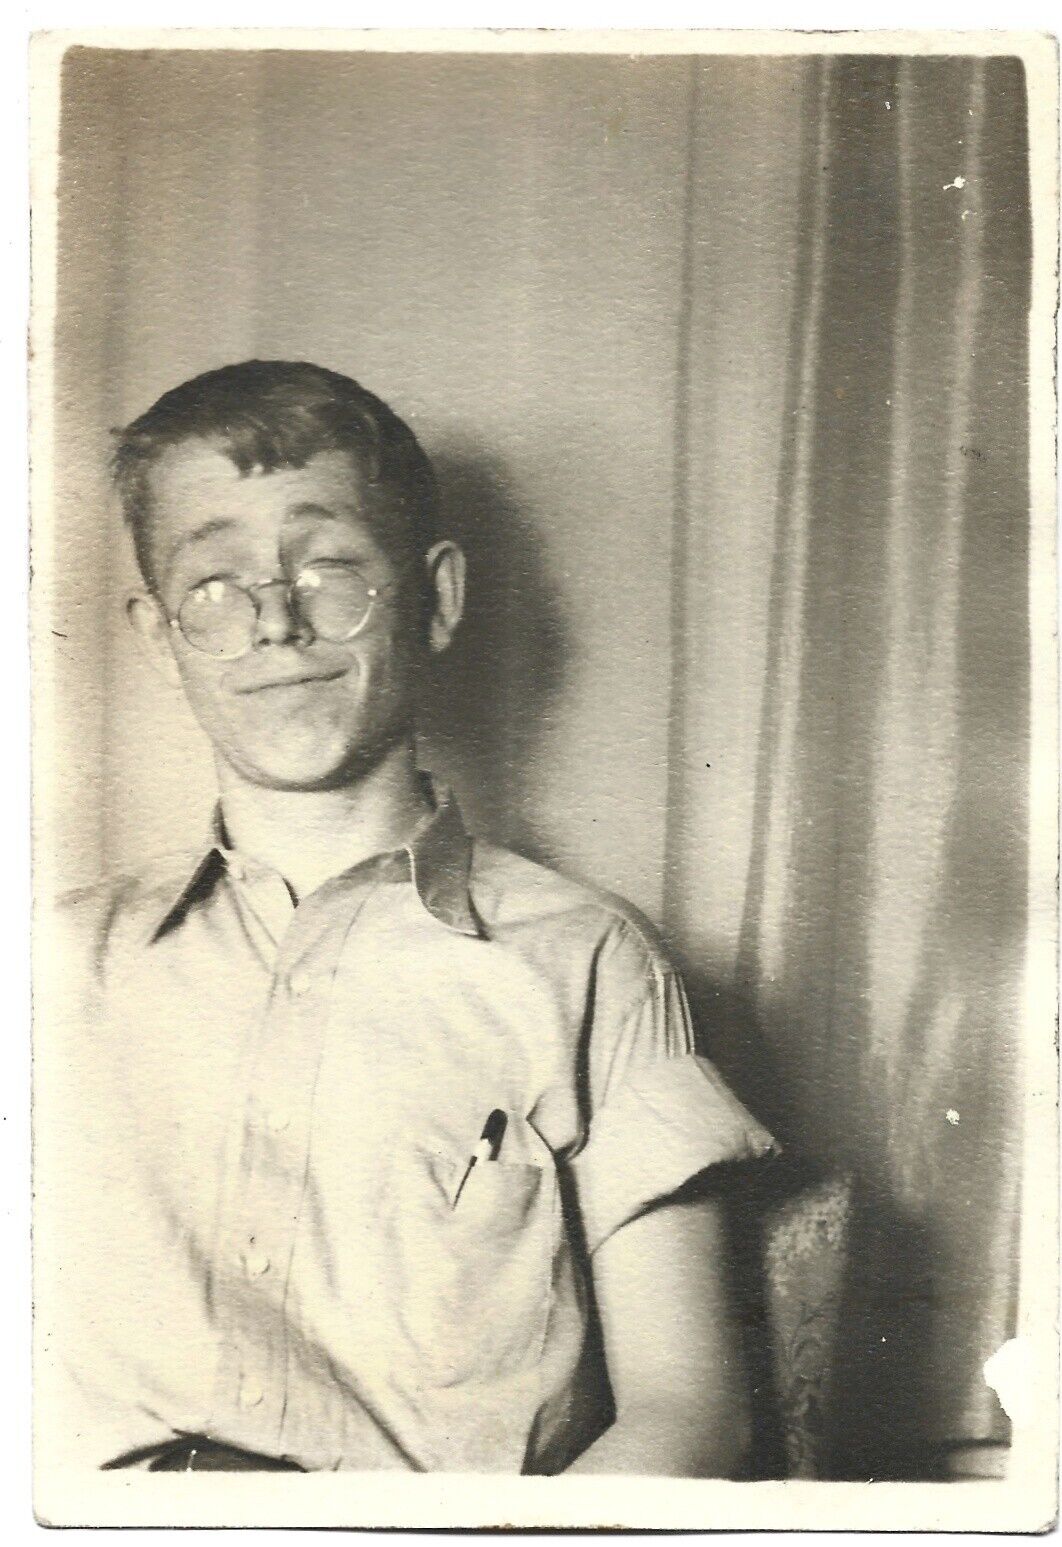 Vintage 1950s Funny Photo of Boy Wearing Glasses on Tip of Nose Makes Silly Face